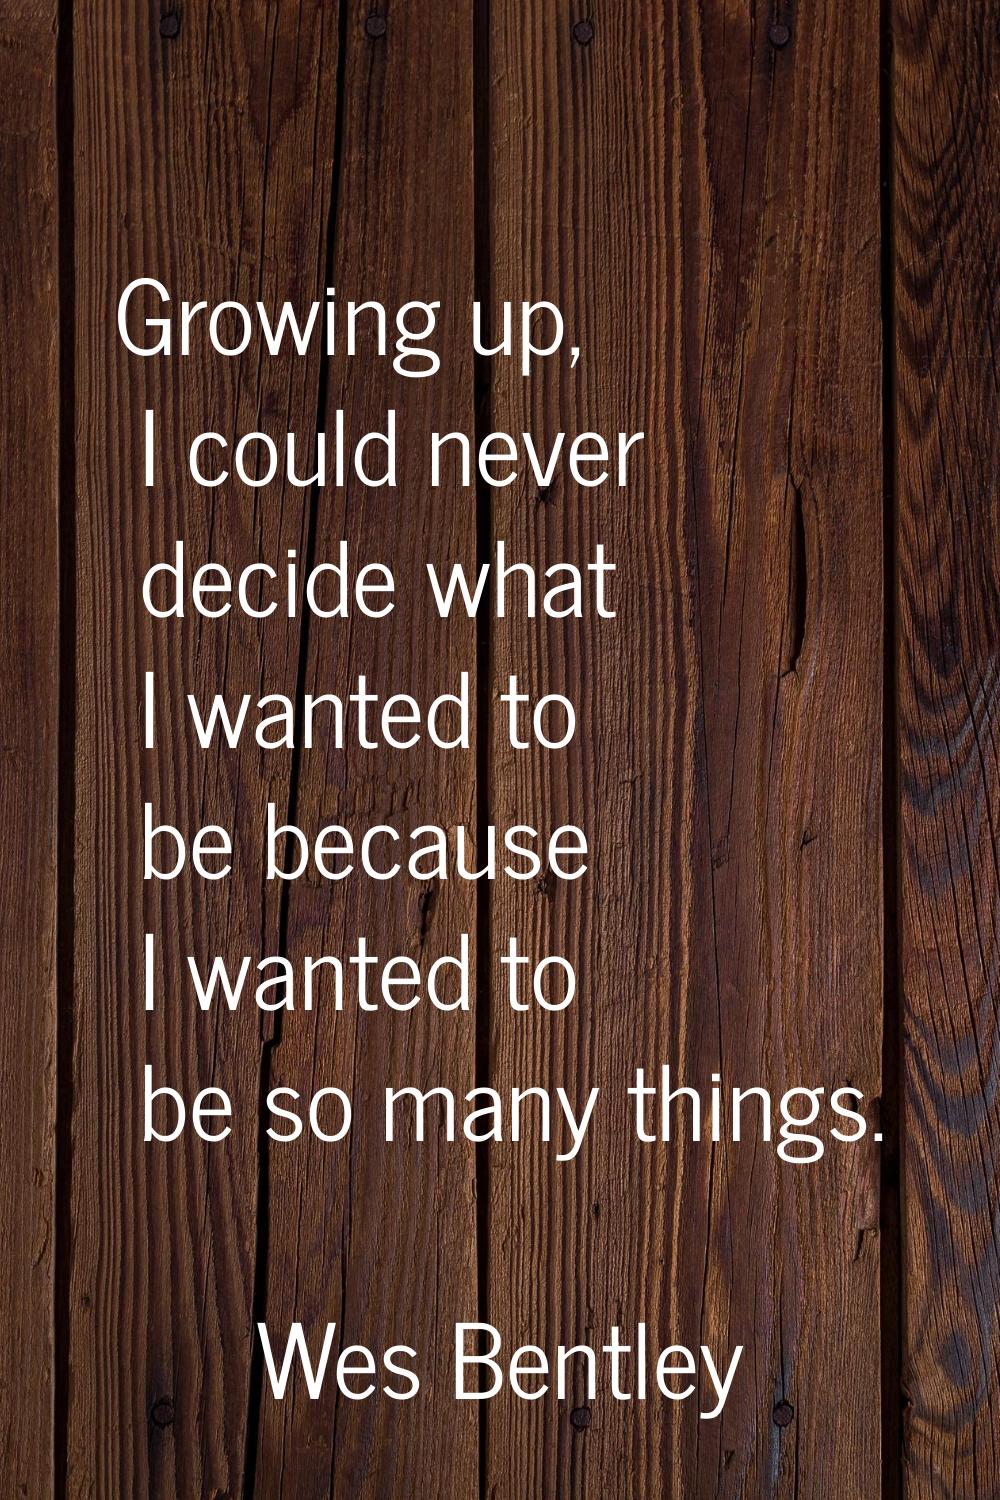 Growing up, I could never decide what I wanted to be because I wanted to be so many things.